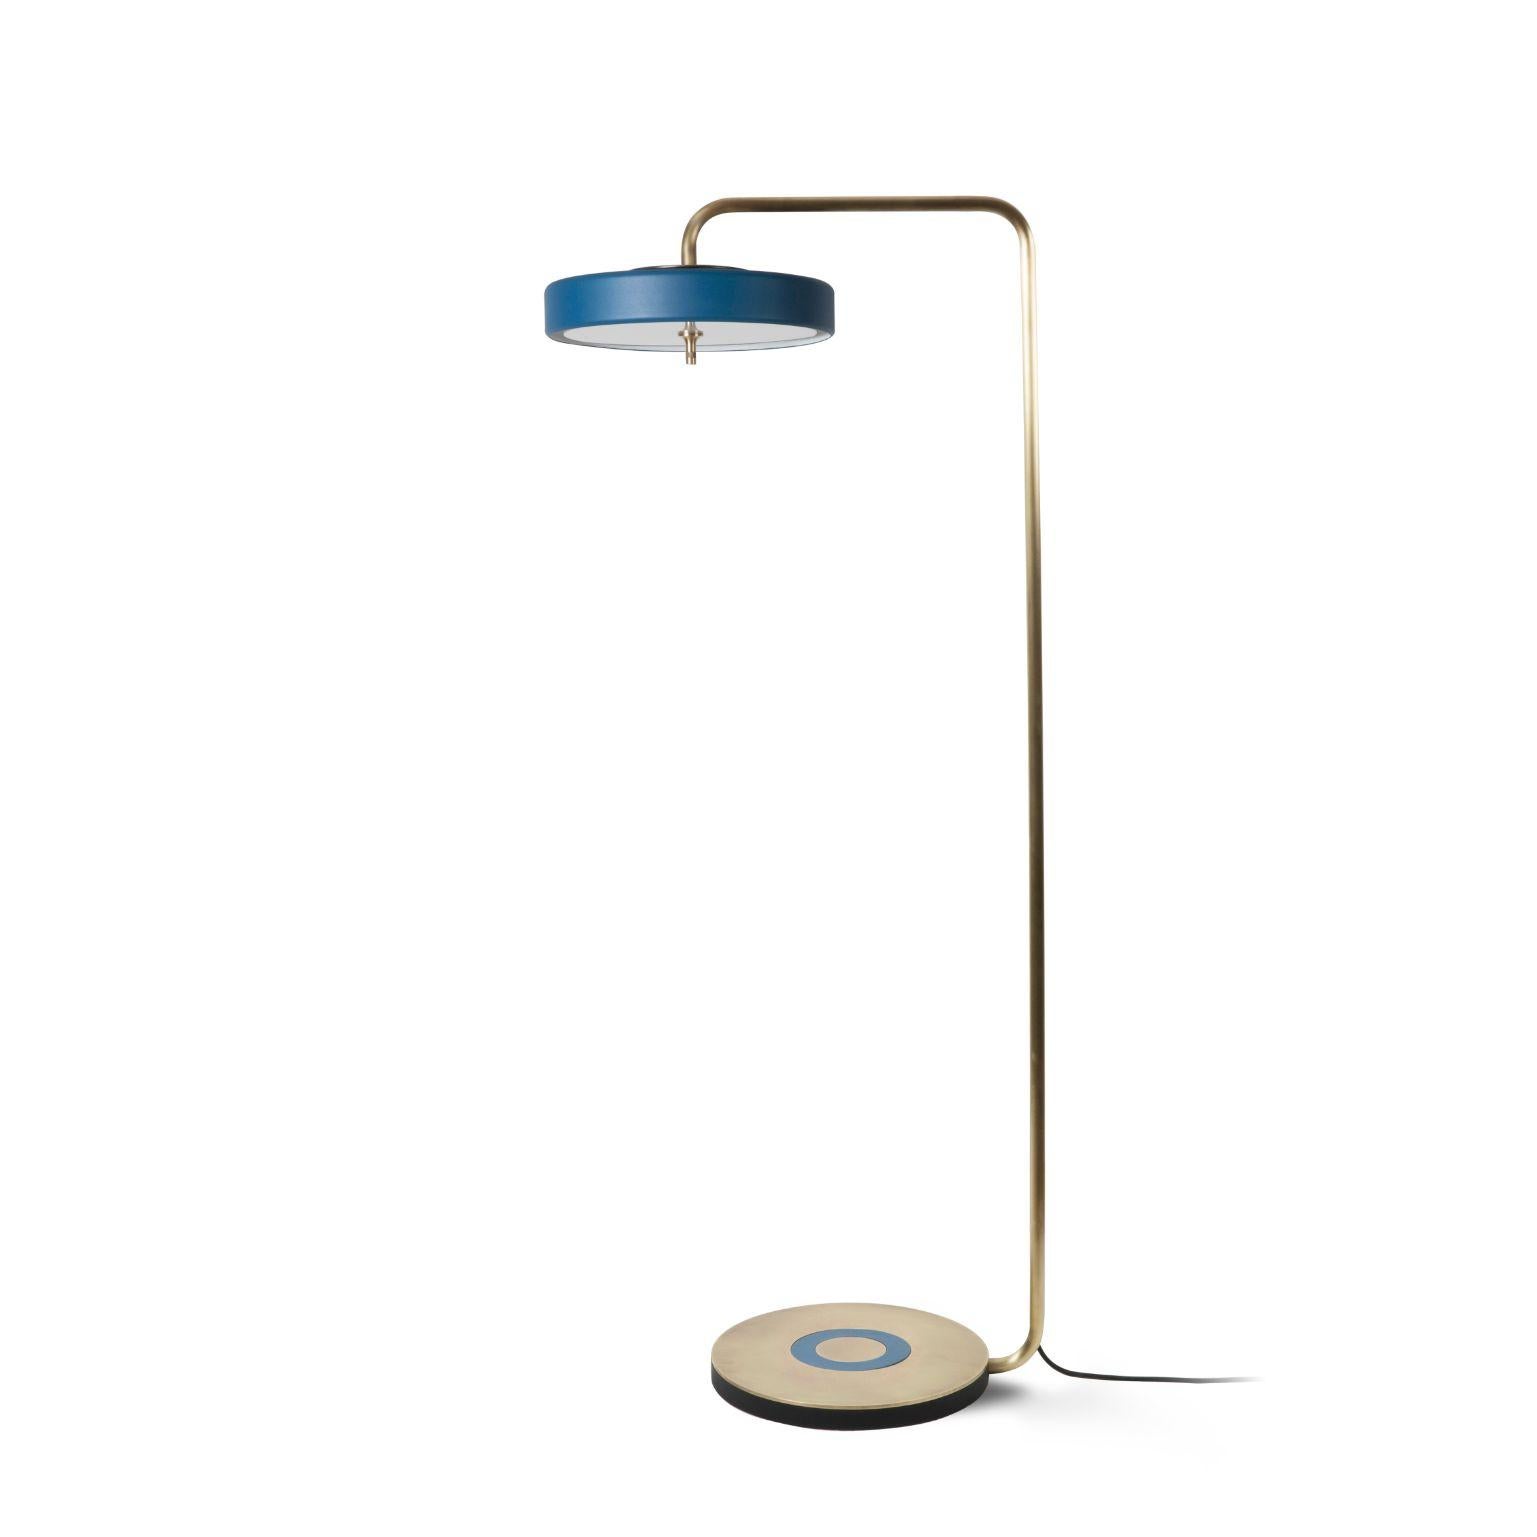 Revolve floor lamp - brushed brass - blue by Bert Frank
Dimensions: 130 x 35.4 x 9.3 cm
Materials: Brass, steel

Also available in polished brass,
When Adam Yeats and Robbie Llewellyn founded Bert Frank in 2013 it was a meeting of minds and the